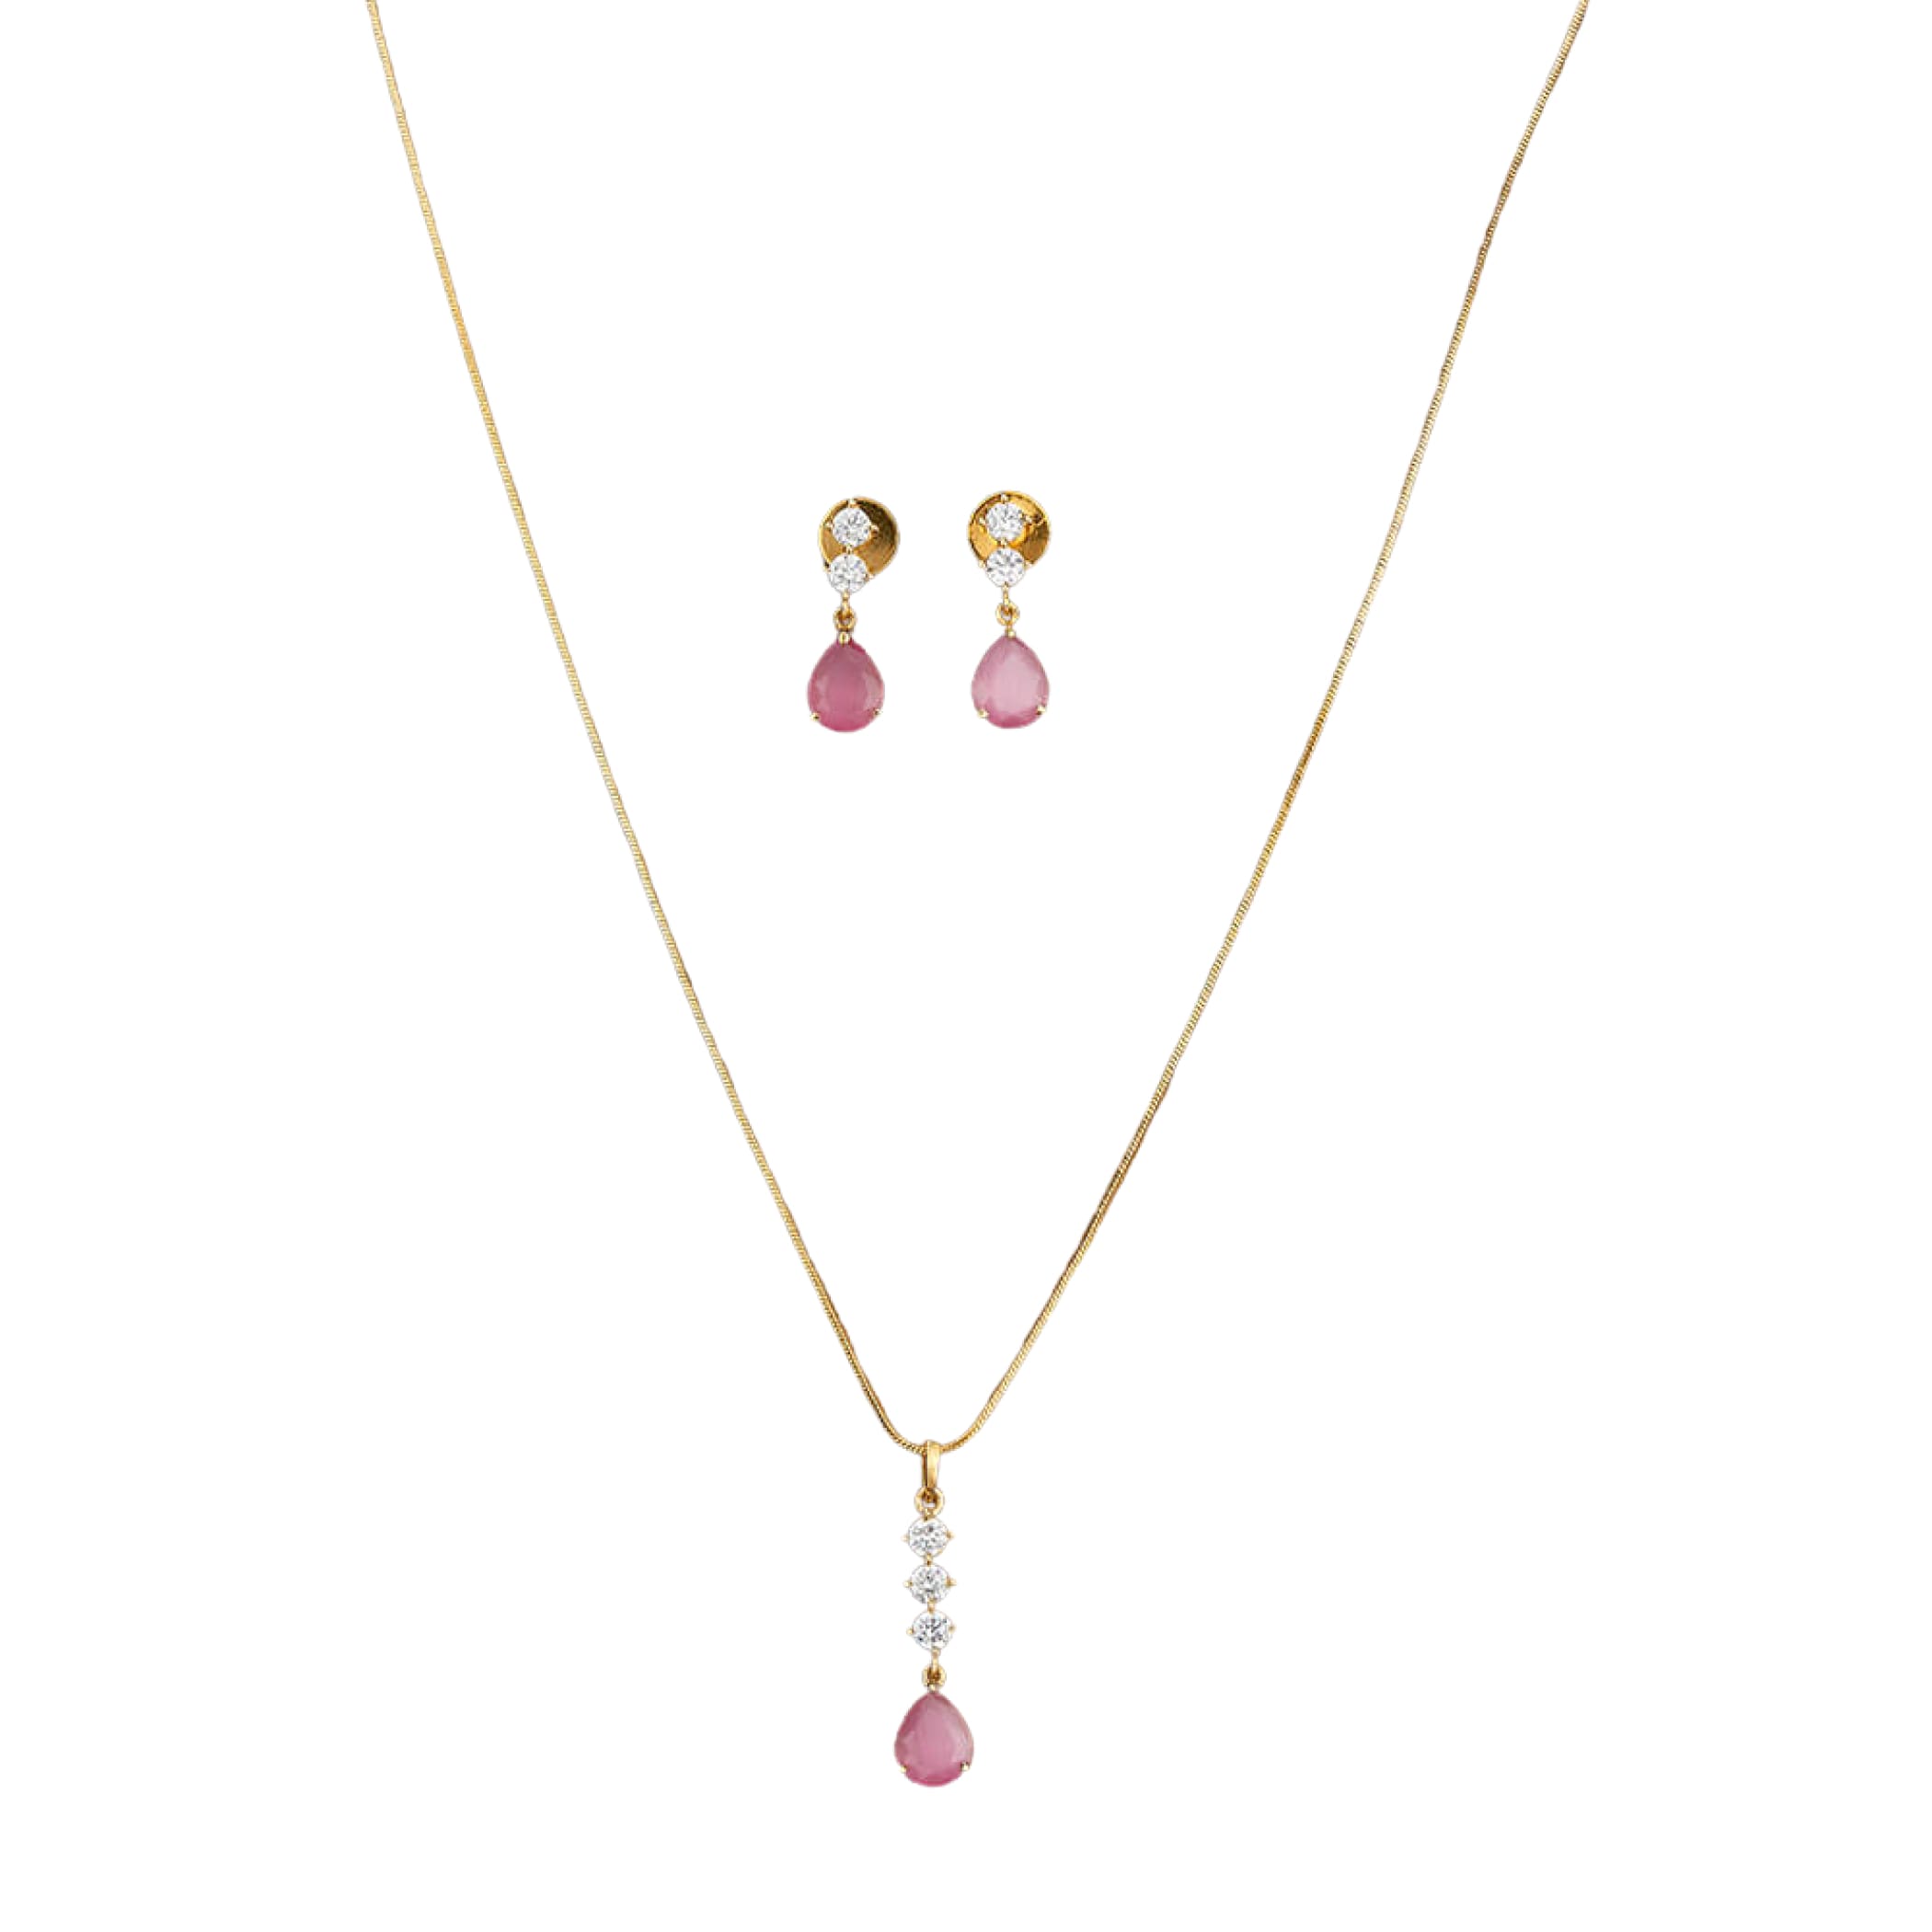 Cz Classic Pendant Set With Gold Plating Jewelry